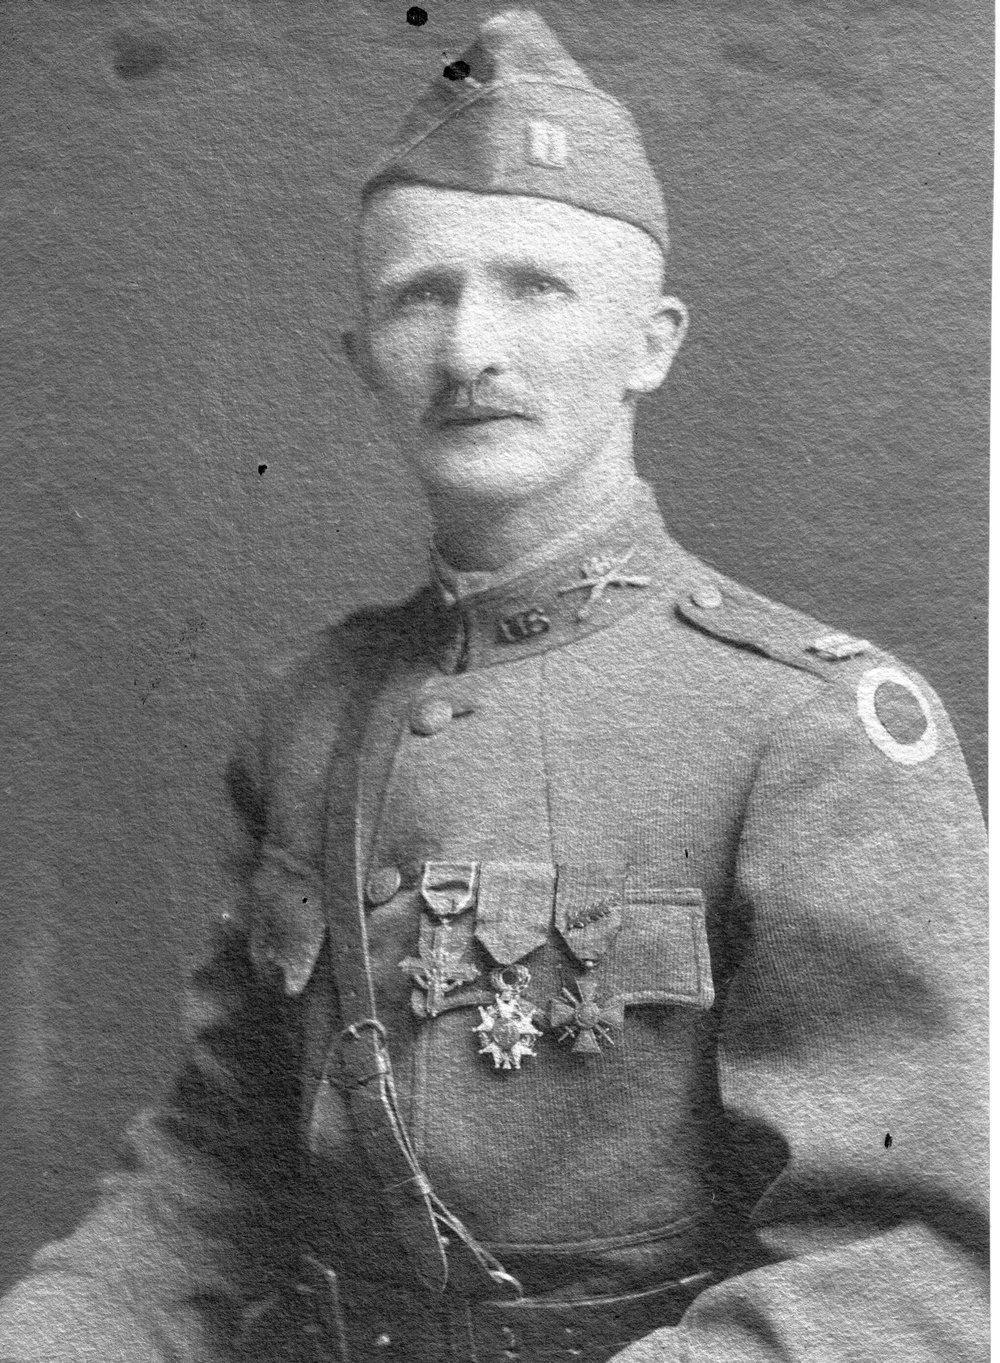 Photograph of Capt. Fred C. Redick